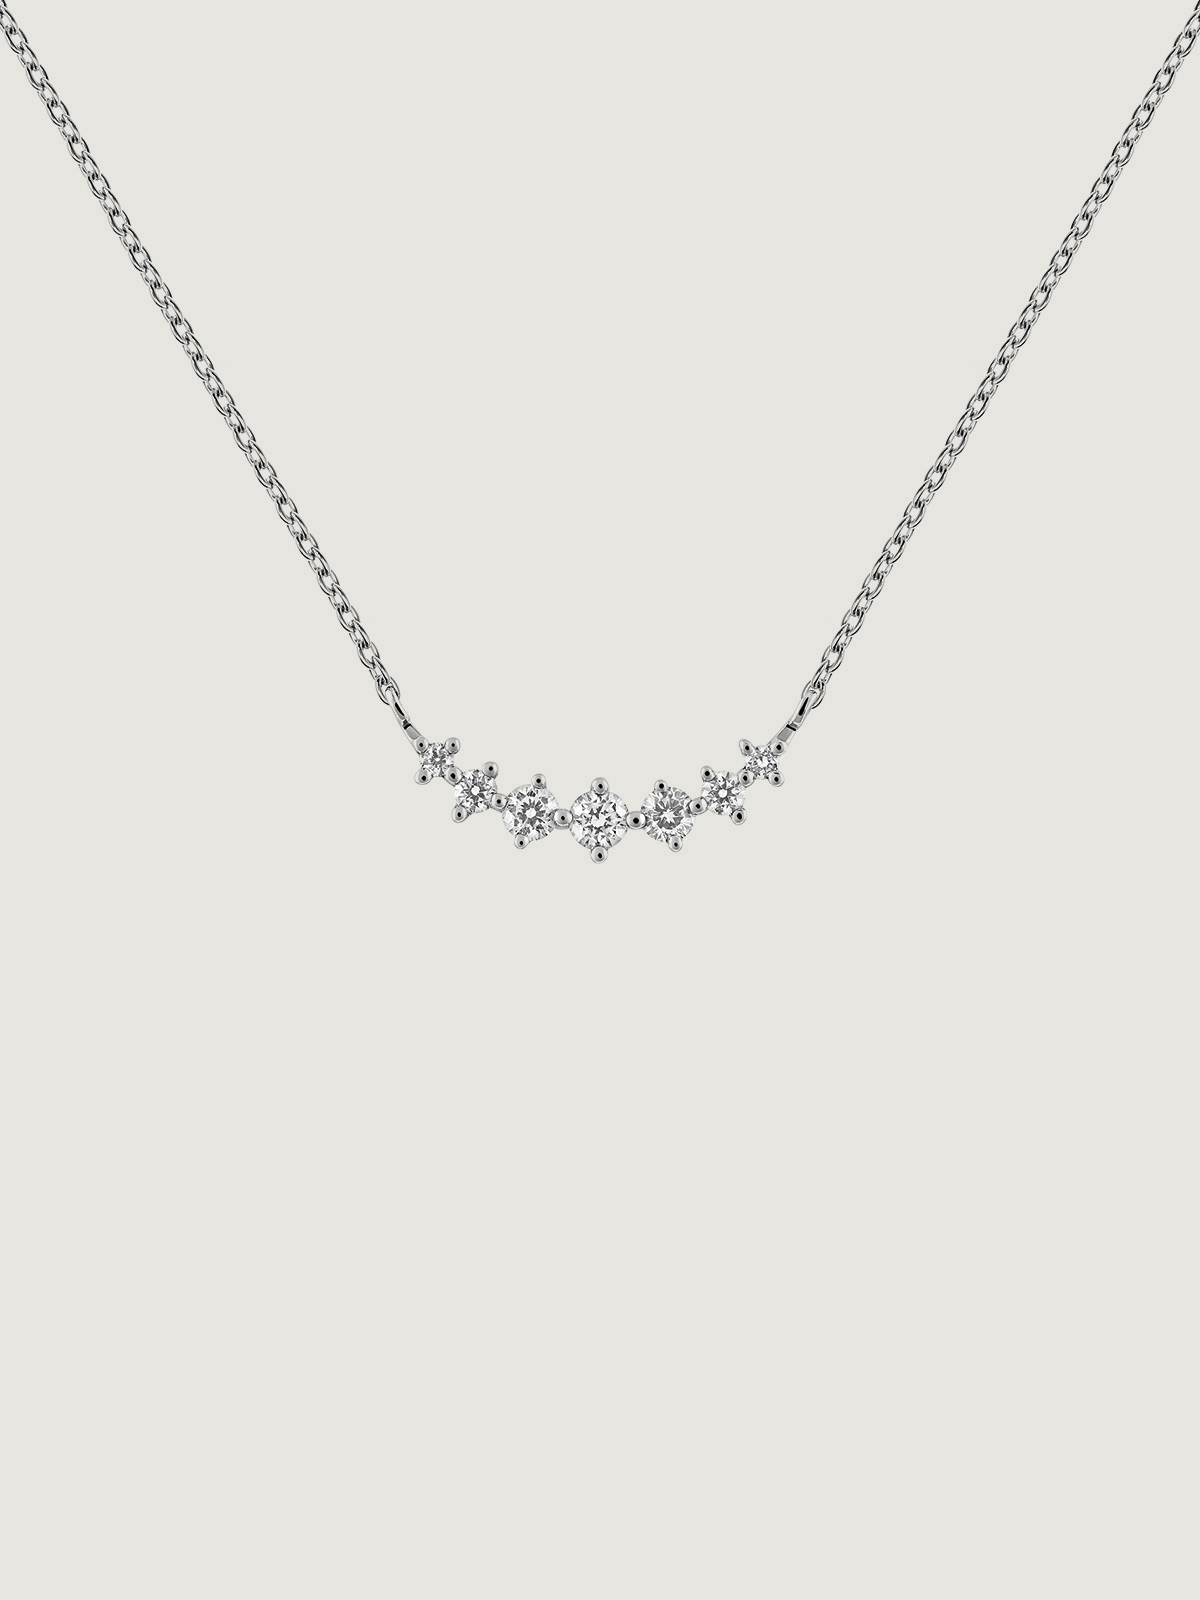 18K white gold necklace with diamonds